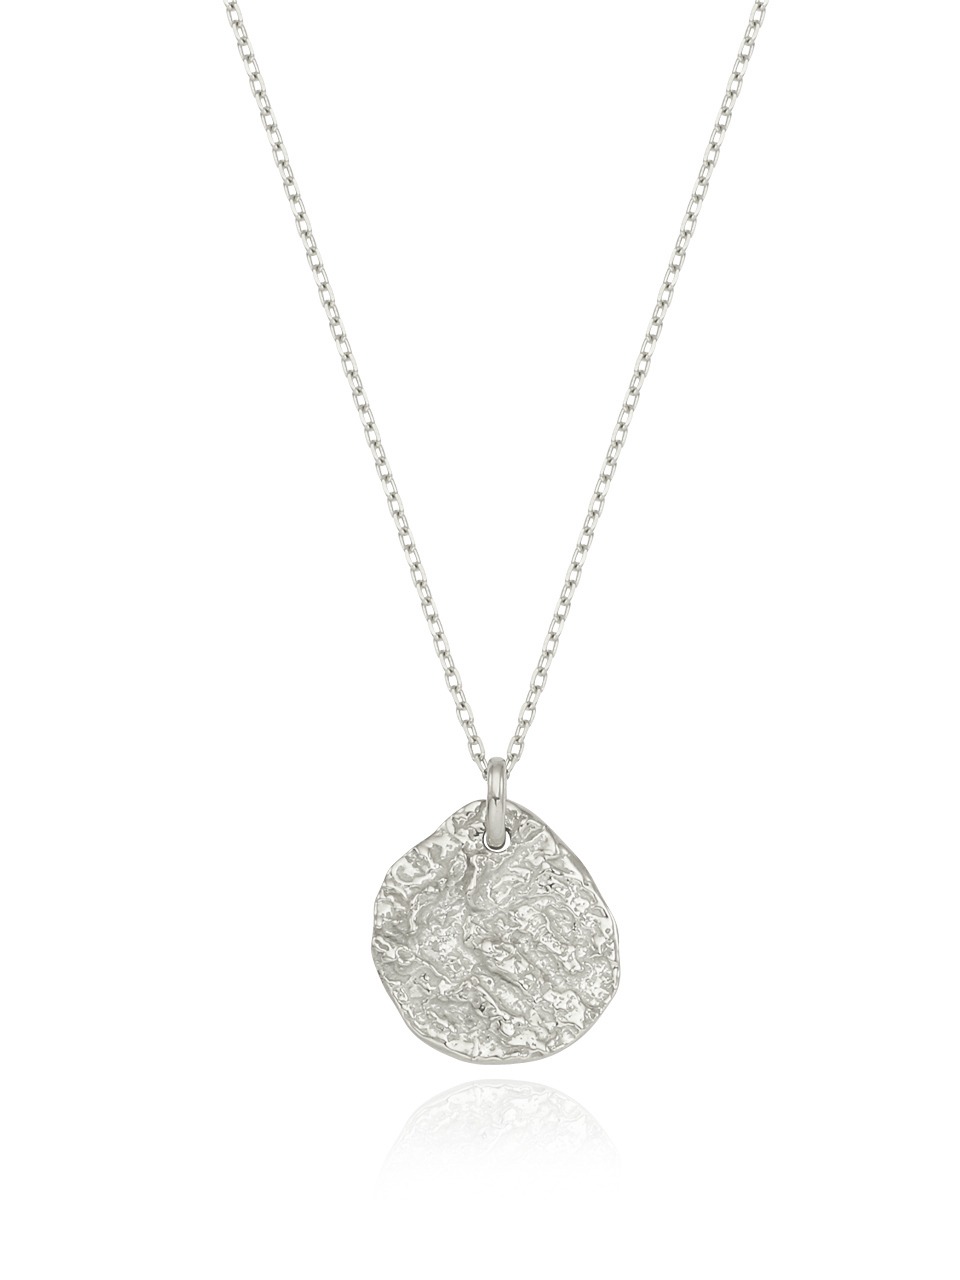 Twig Coin Necklace